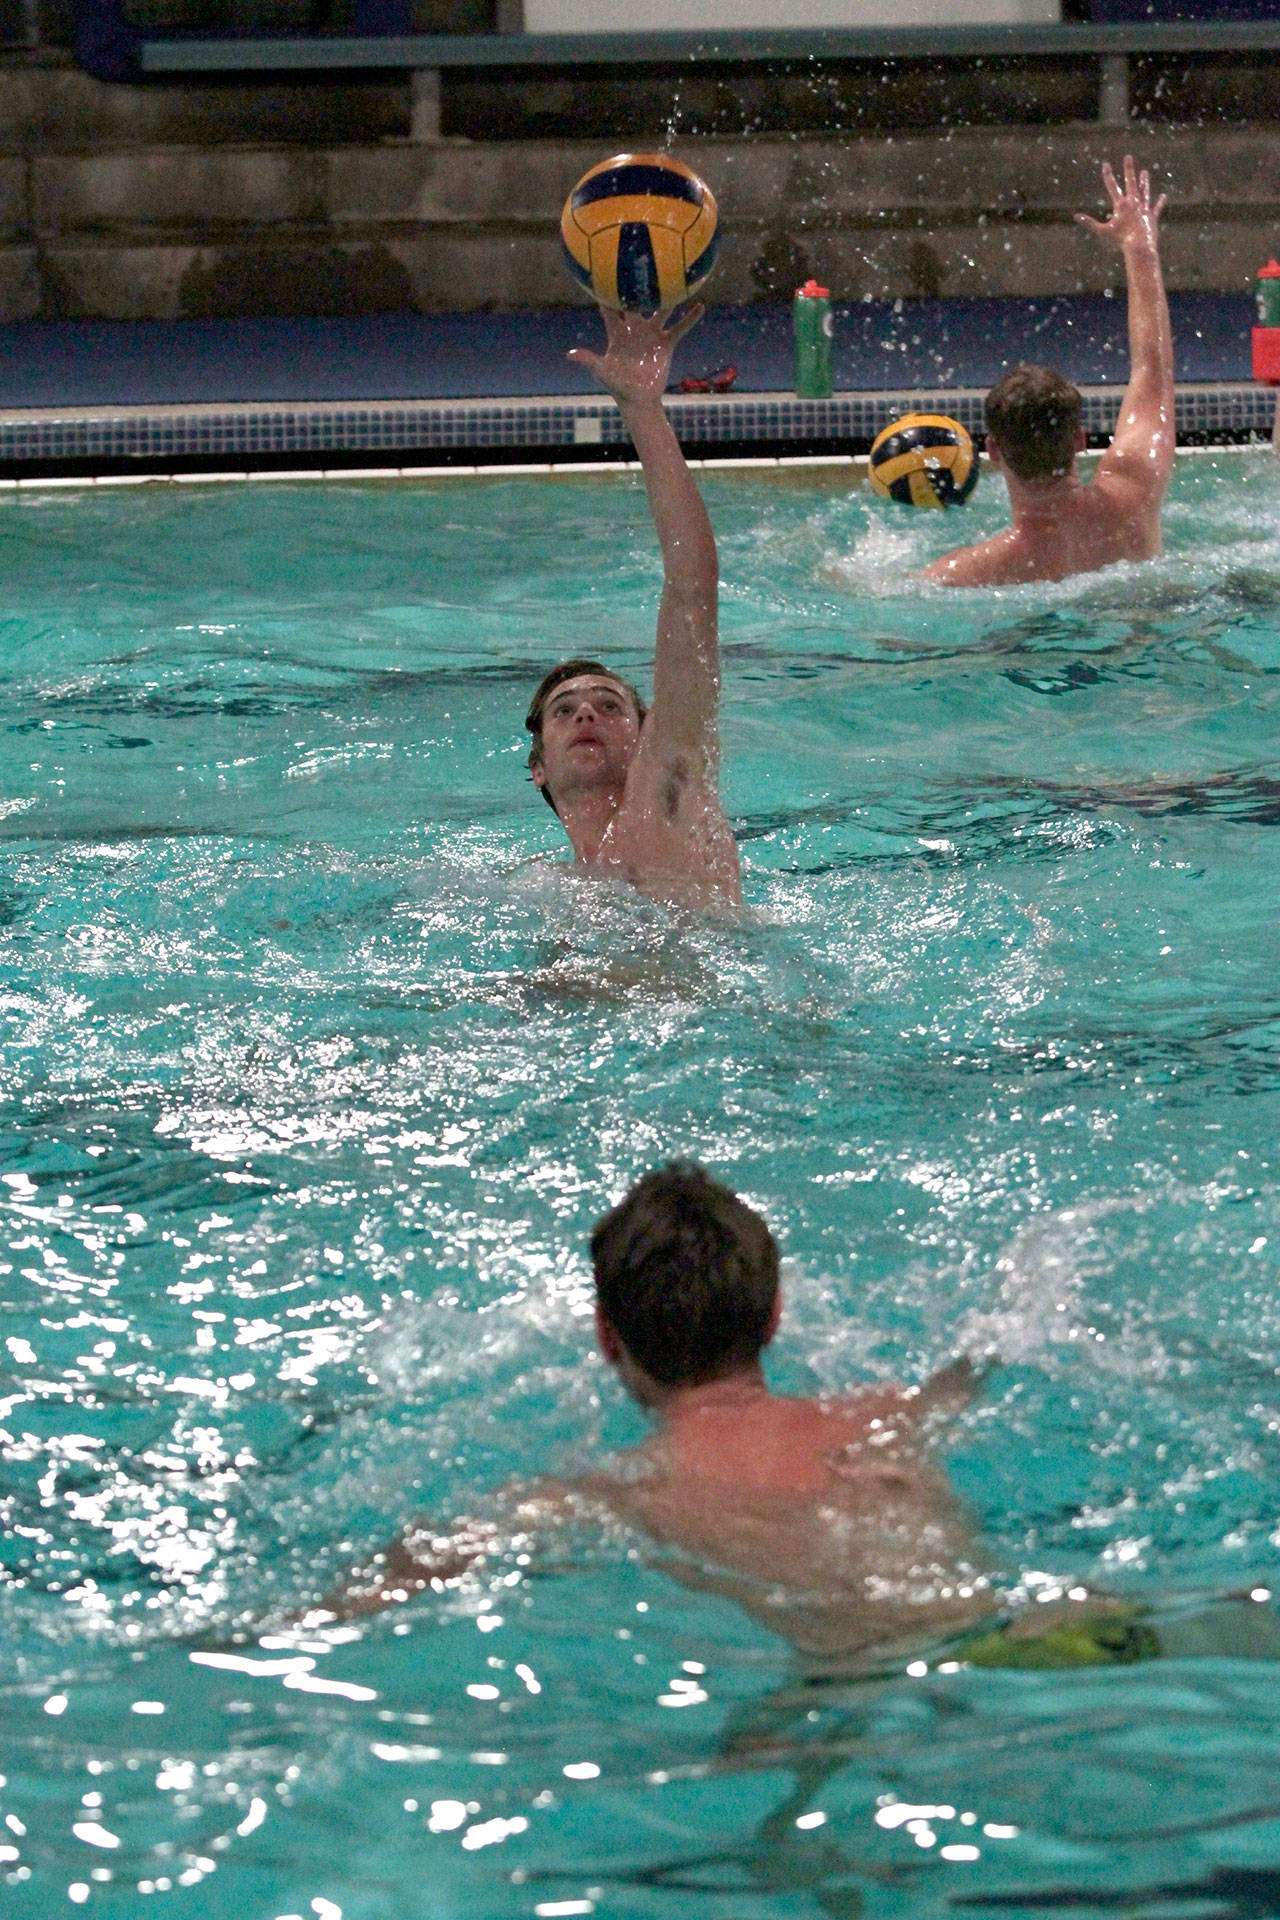 Luciano Marano | Bainbridge Island Review - The Bainbridge High School varsity boys water polo team works through a set of drills during a recent practice session.